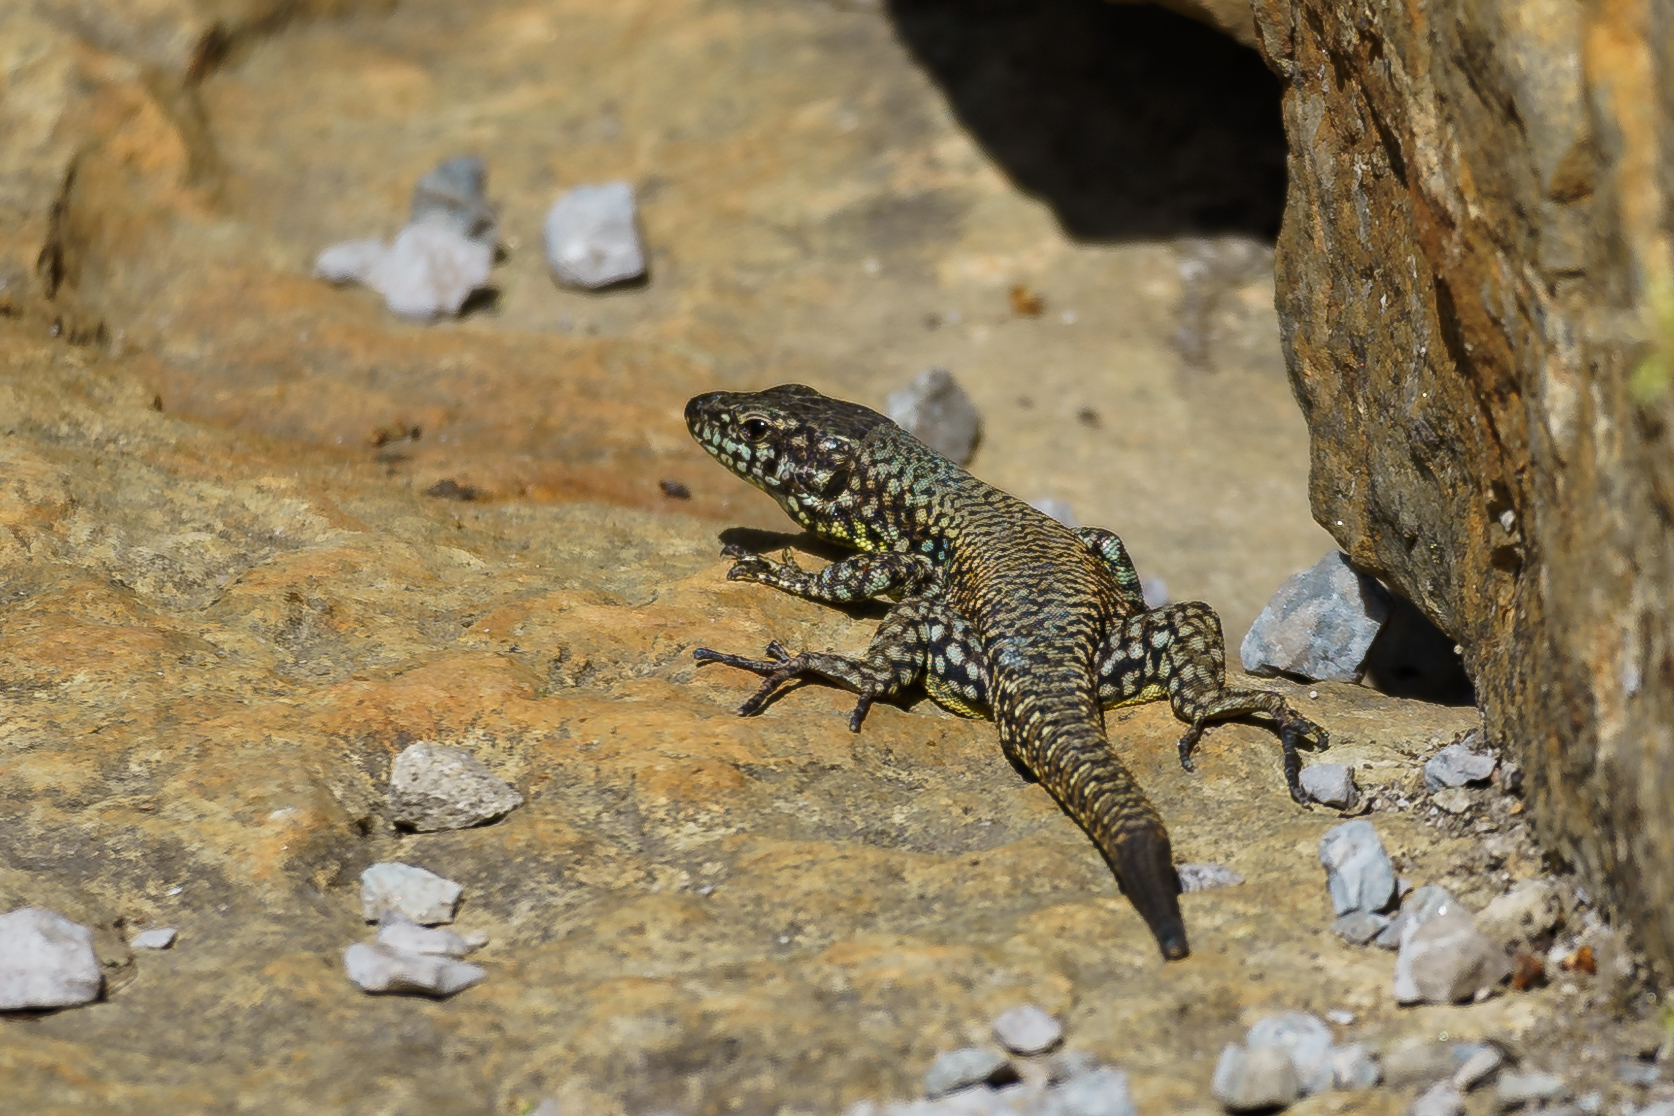 Photo of a lizard sunning itself on a rock at the Lick Run Greenway pond